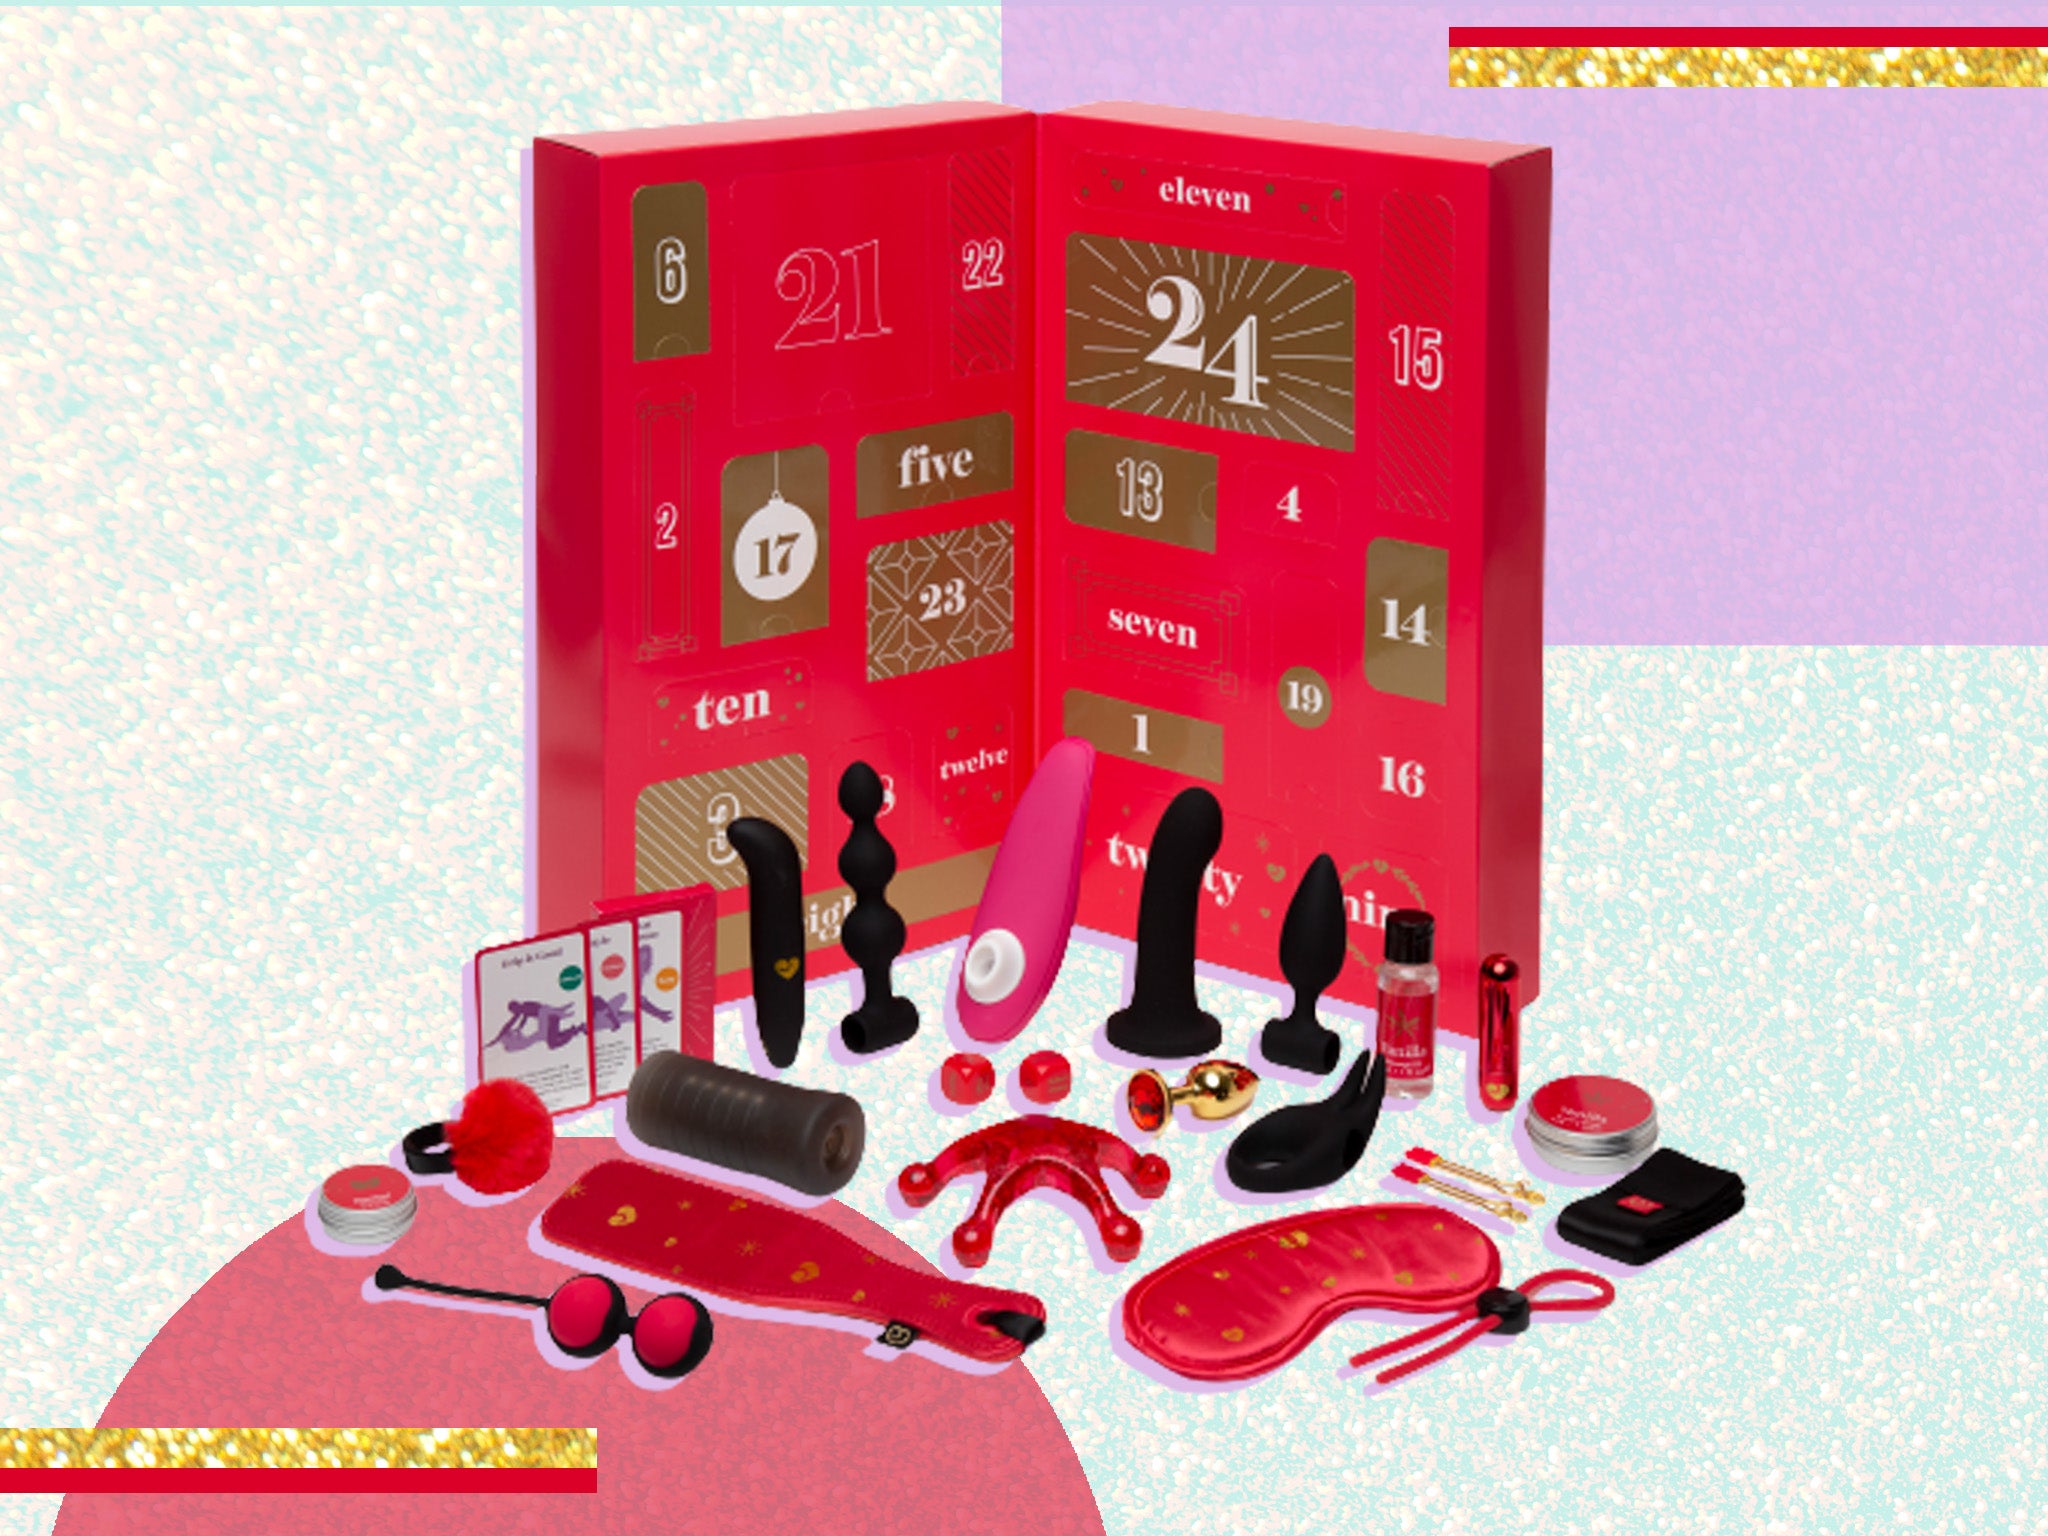 You’ll find the Womanizer vibrator hiding inside, which by itself retails for the same price as the entire calendar